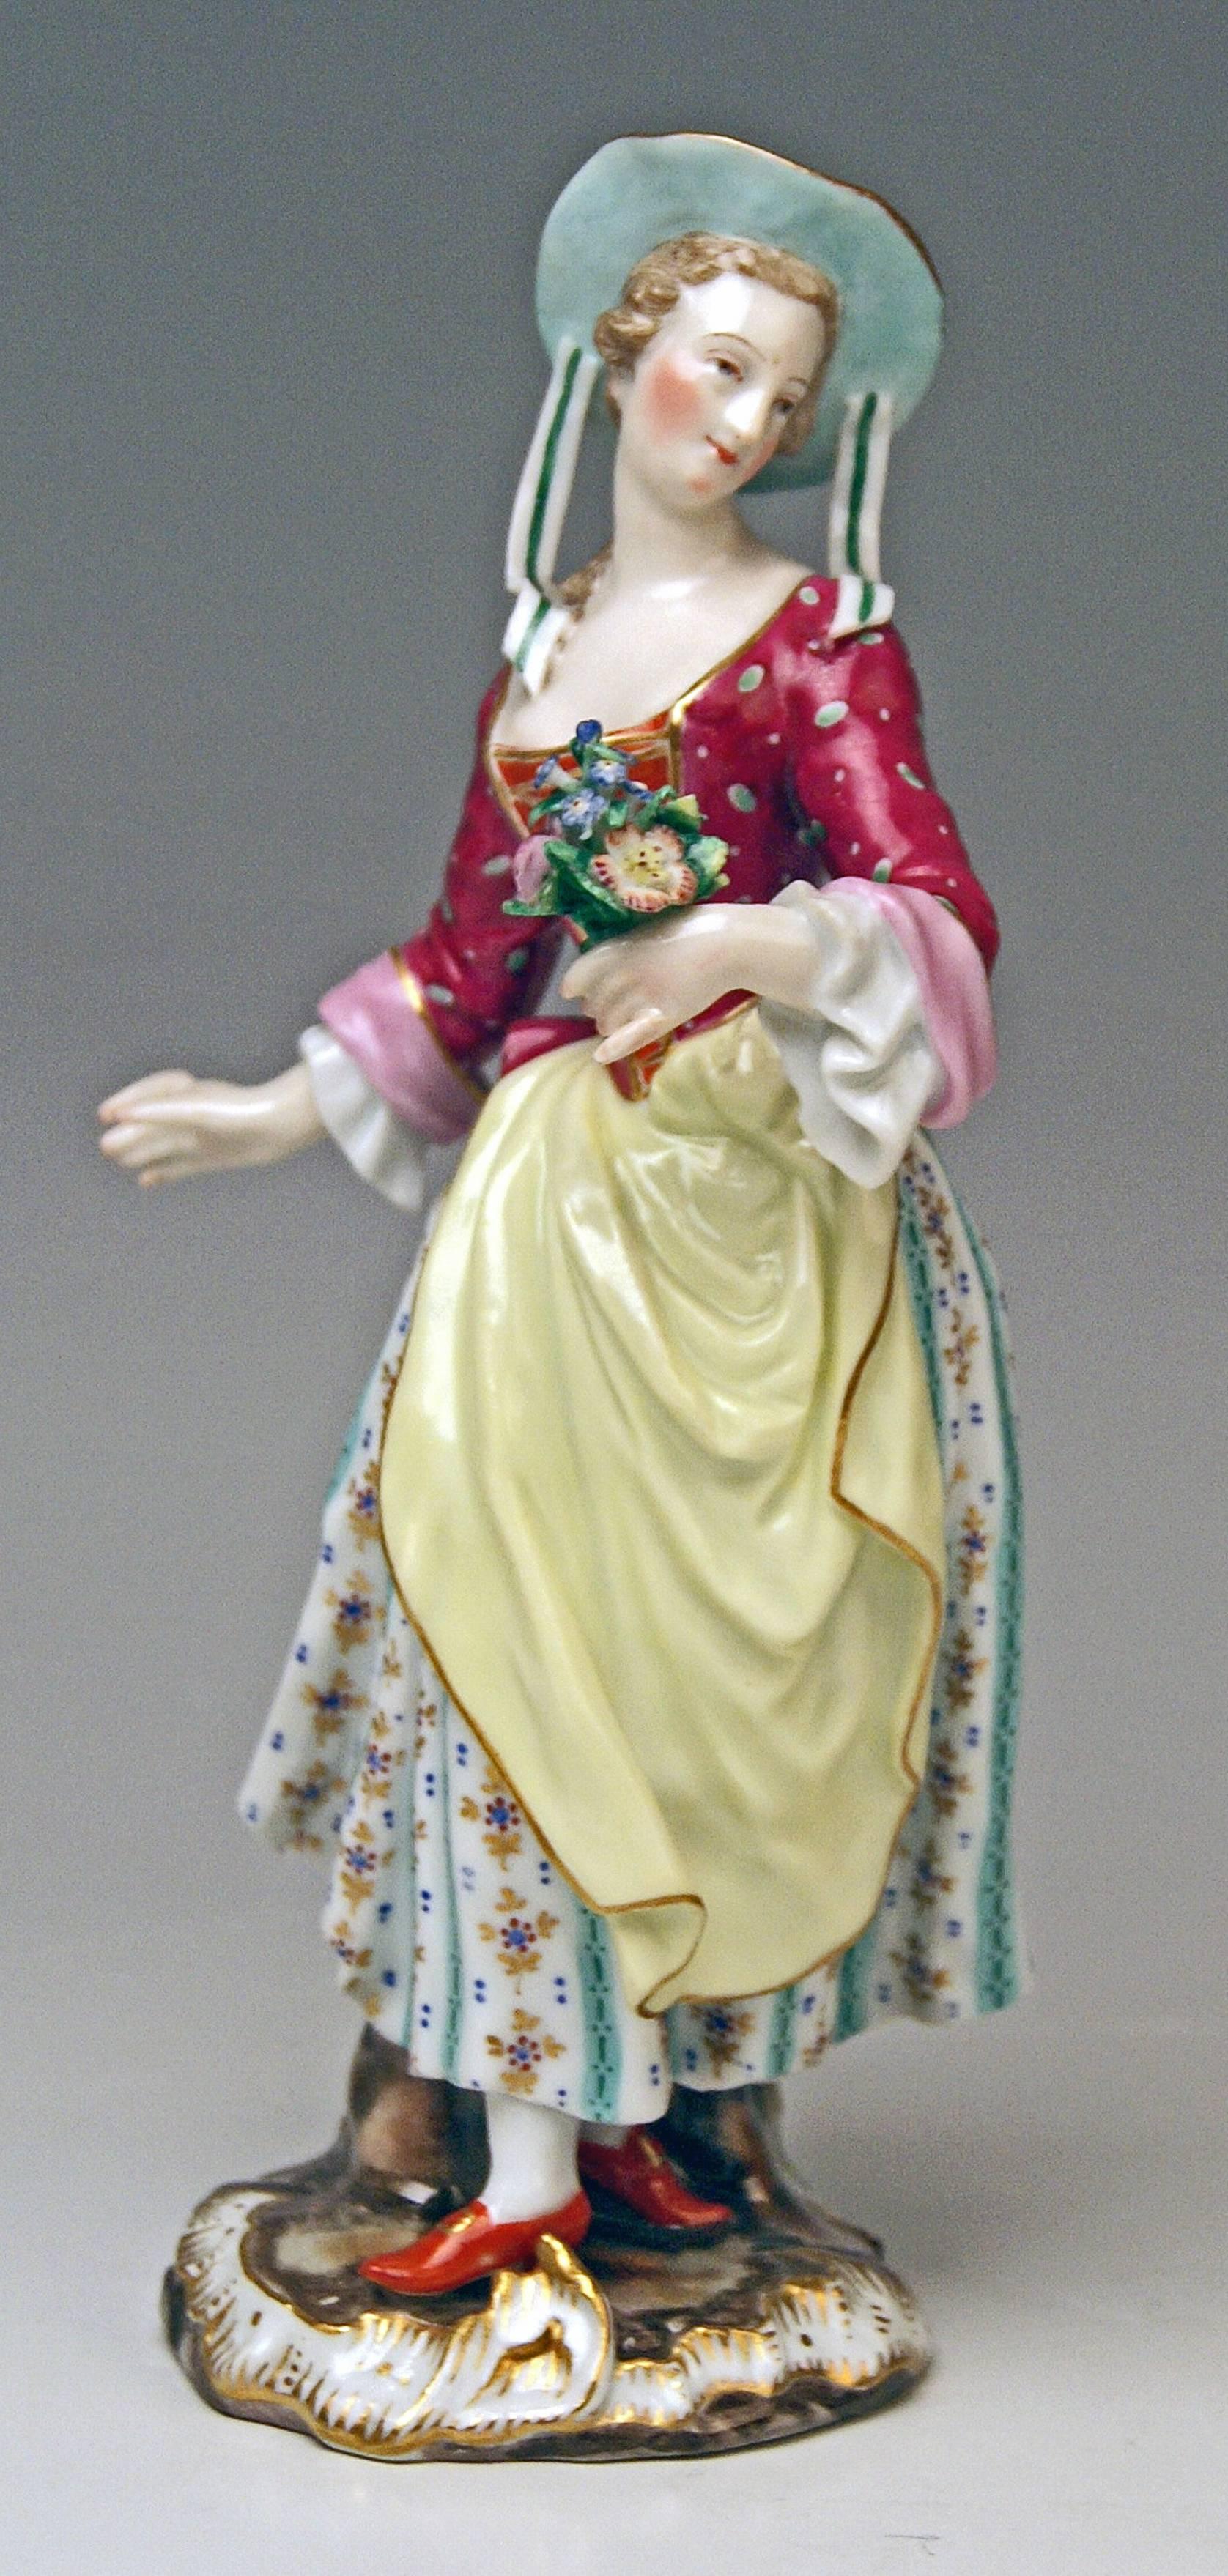 Rococo Meissen Figurines Lady with Flowers Man with Hat Models 2342 2346 Kaendler, 1850